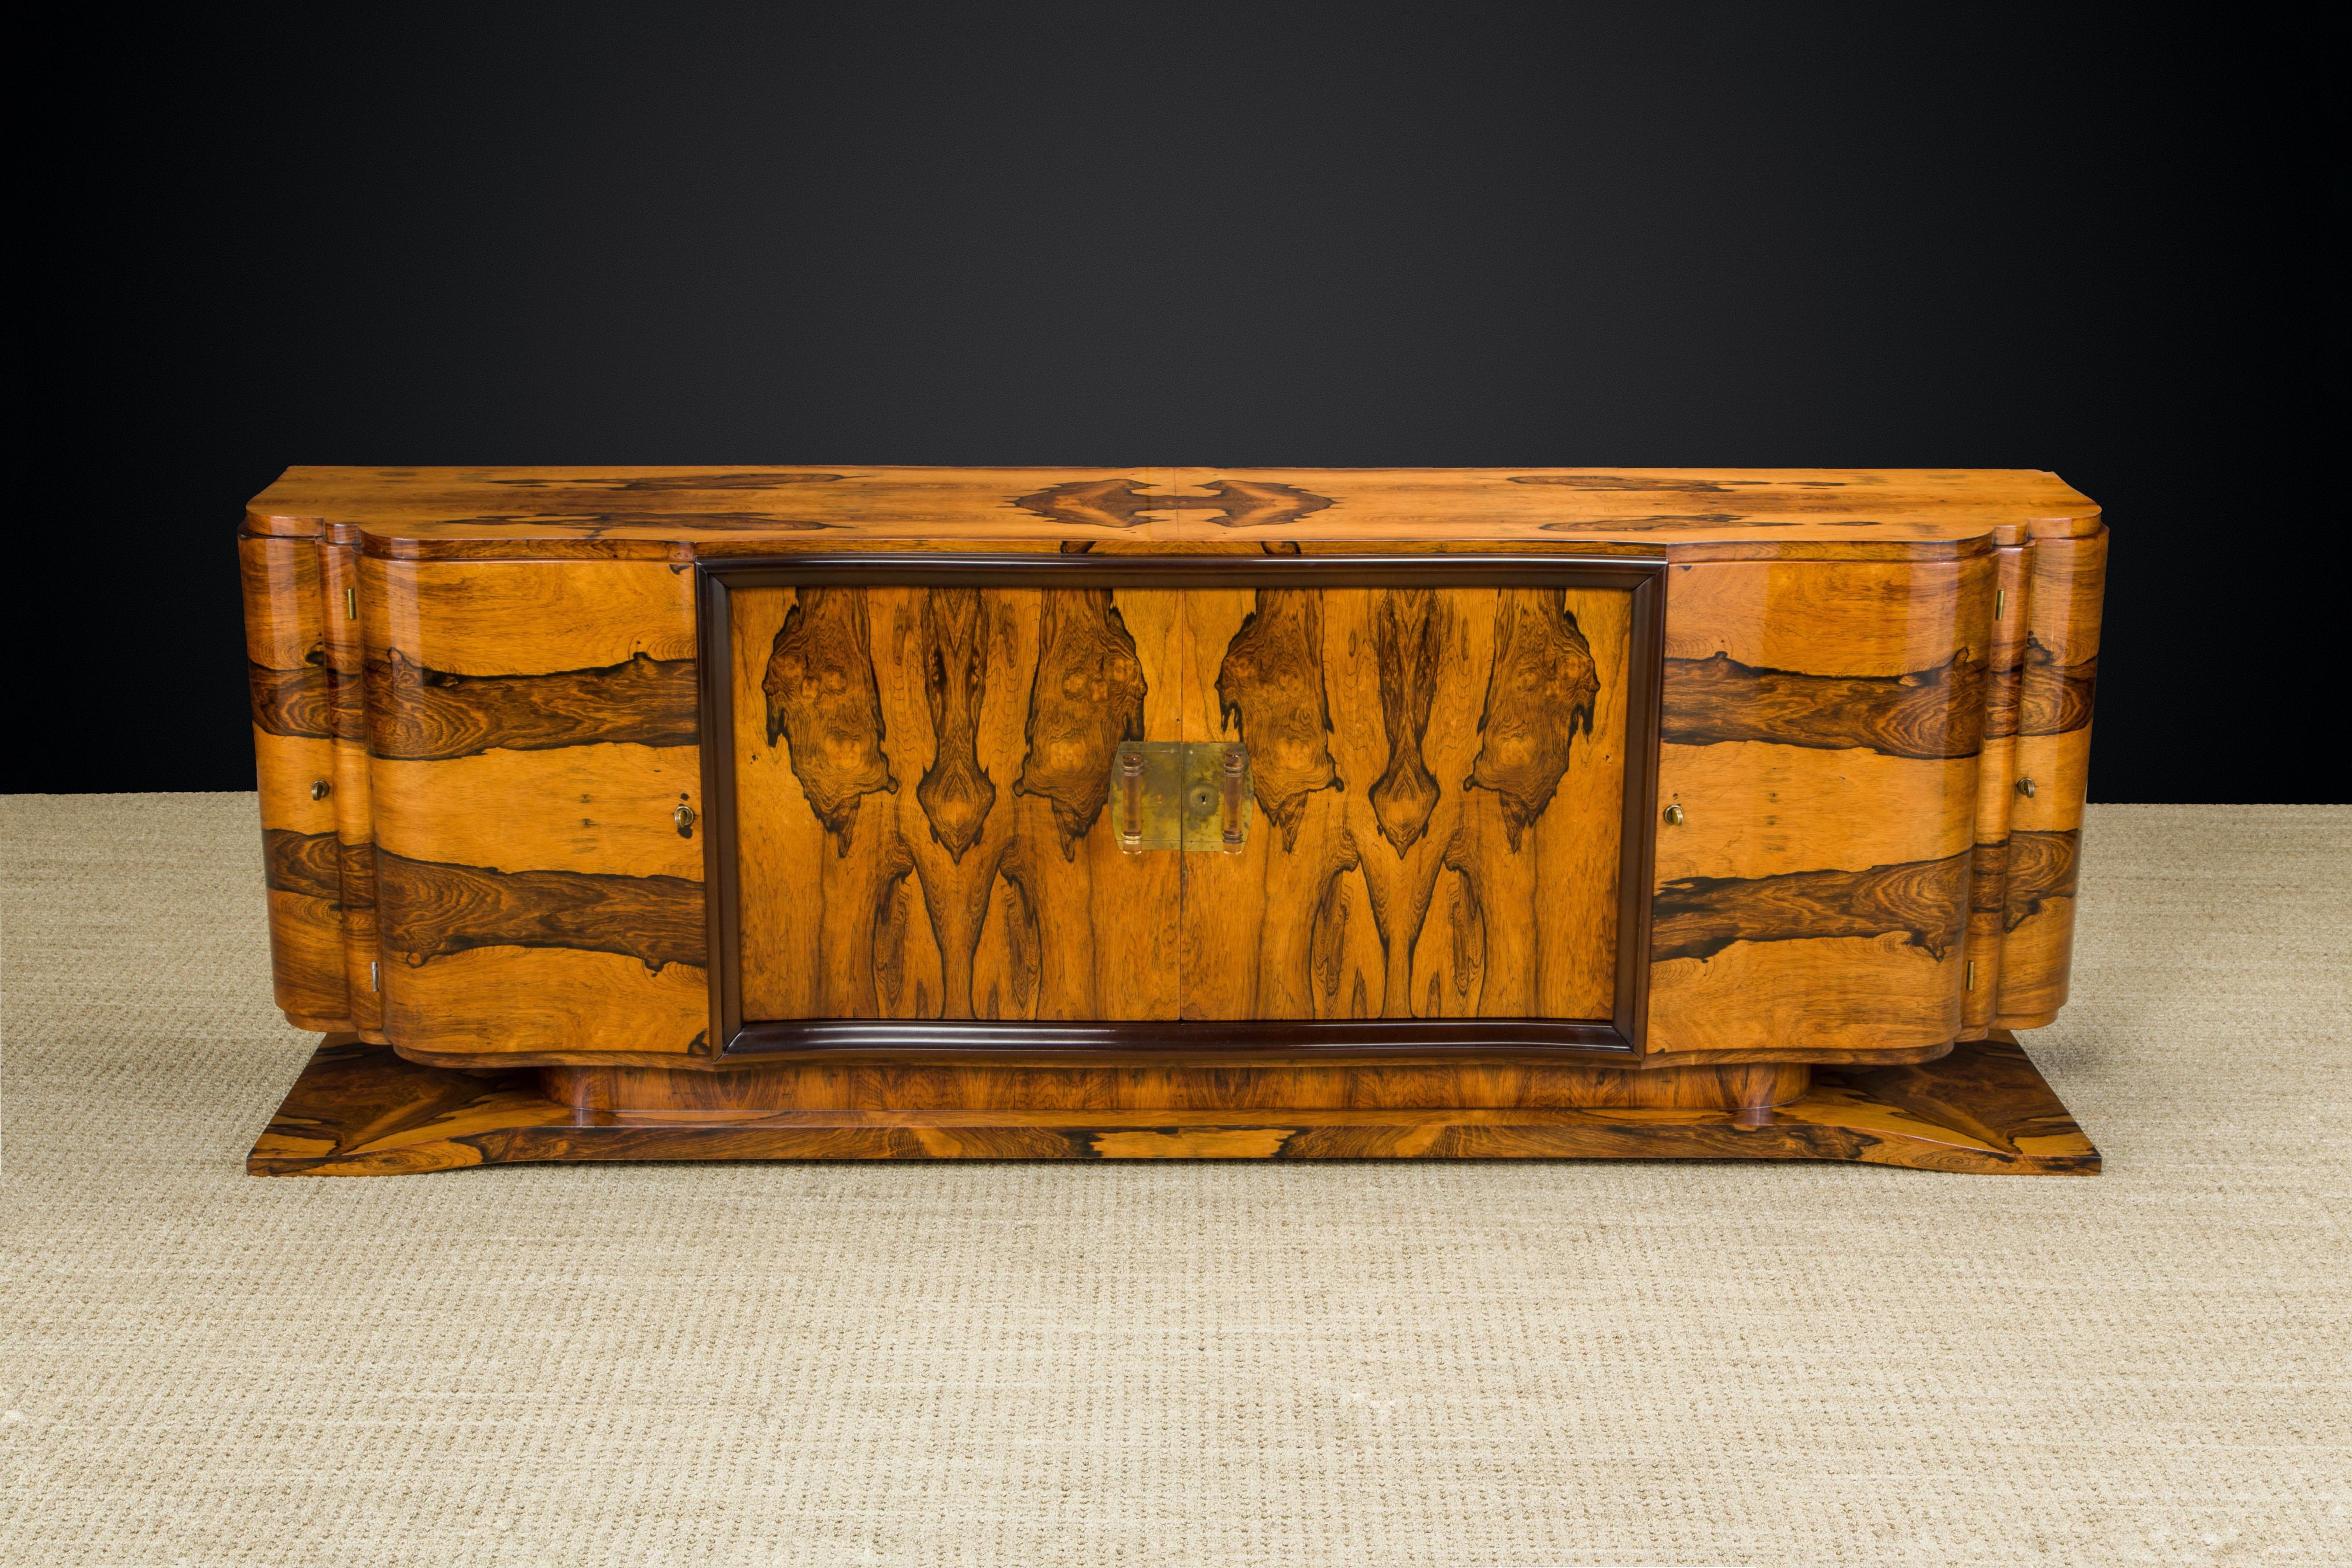 This stunning and exquisite sideboard cabinet was expertly crafted from Rosewood with brass and rose lucite center cabinet pulls. This monumentally sized cabinet was clearly an important piece as its craftsmanship and materials are first-class. The